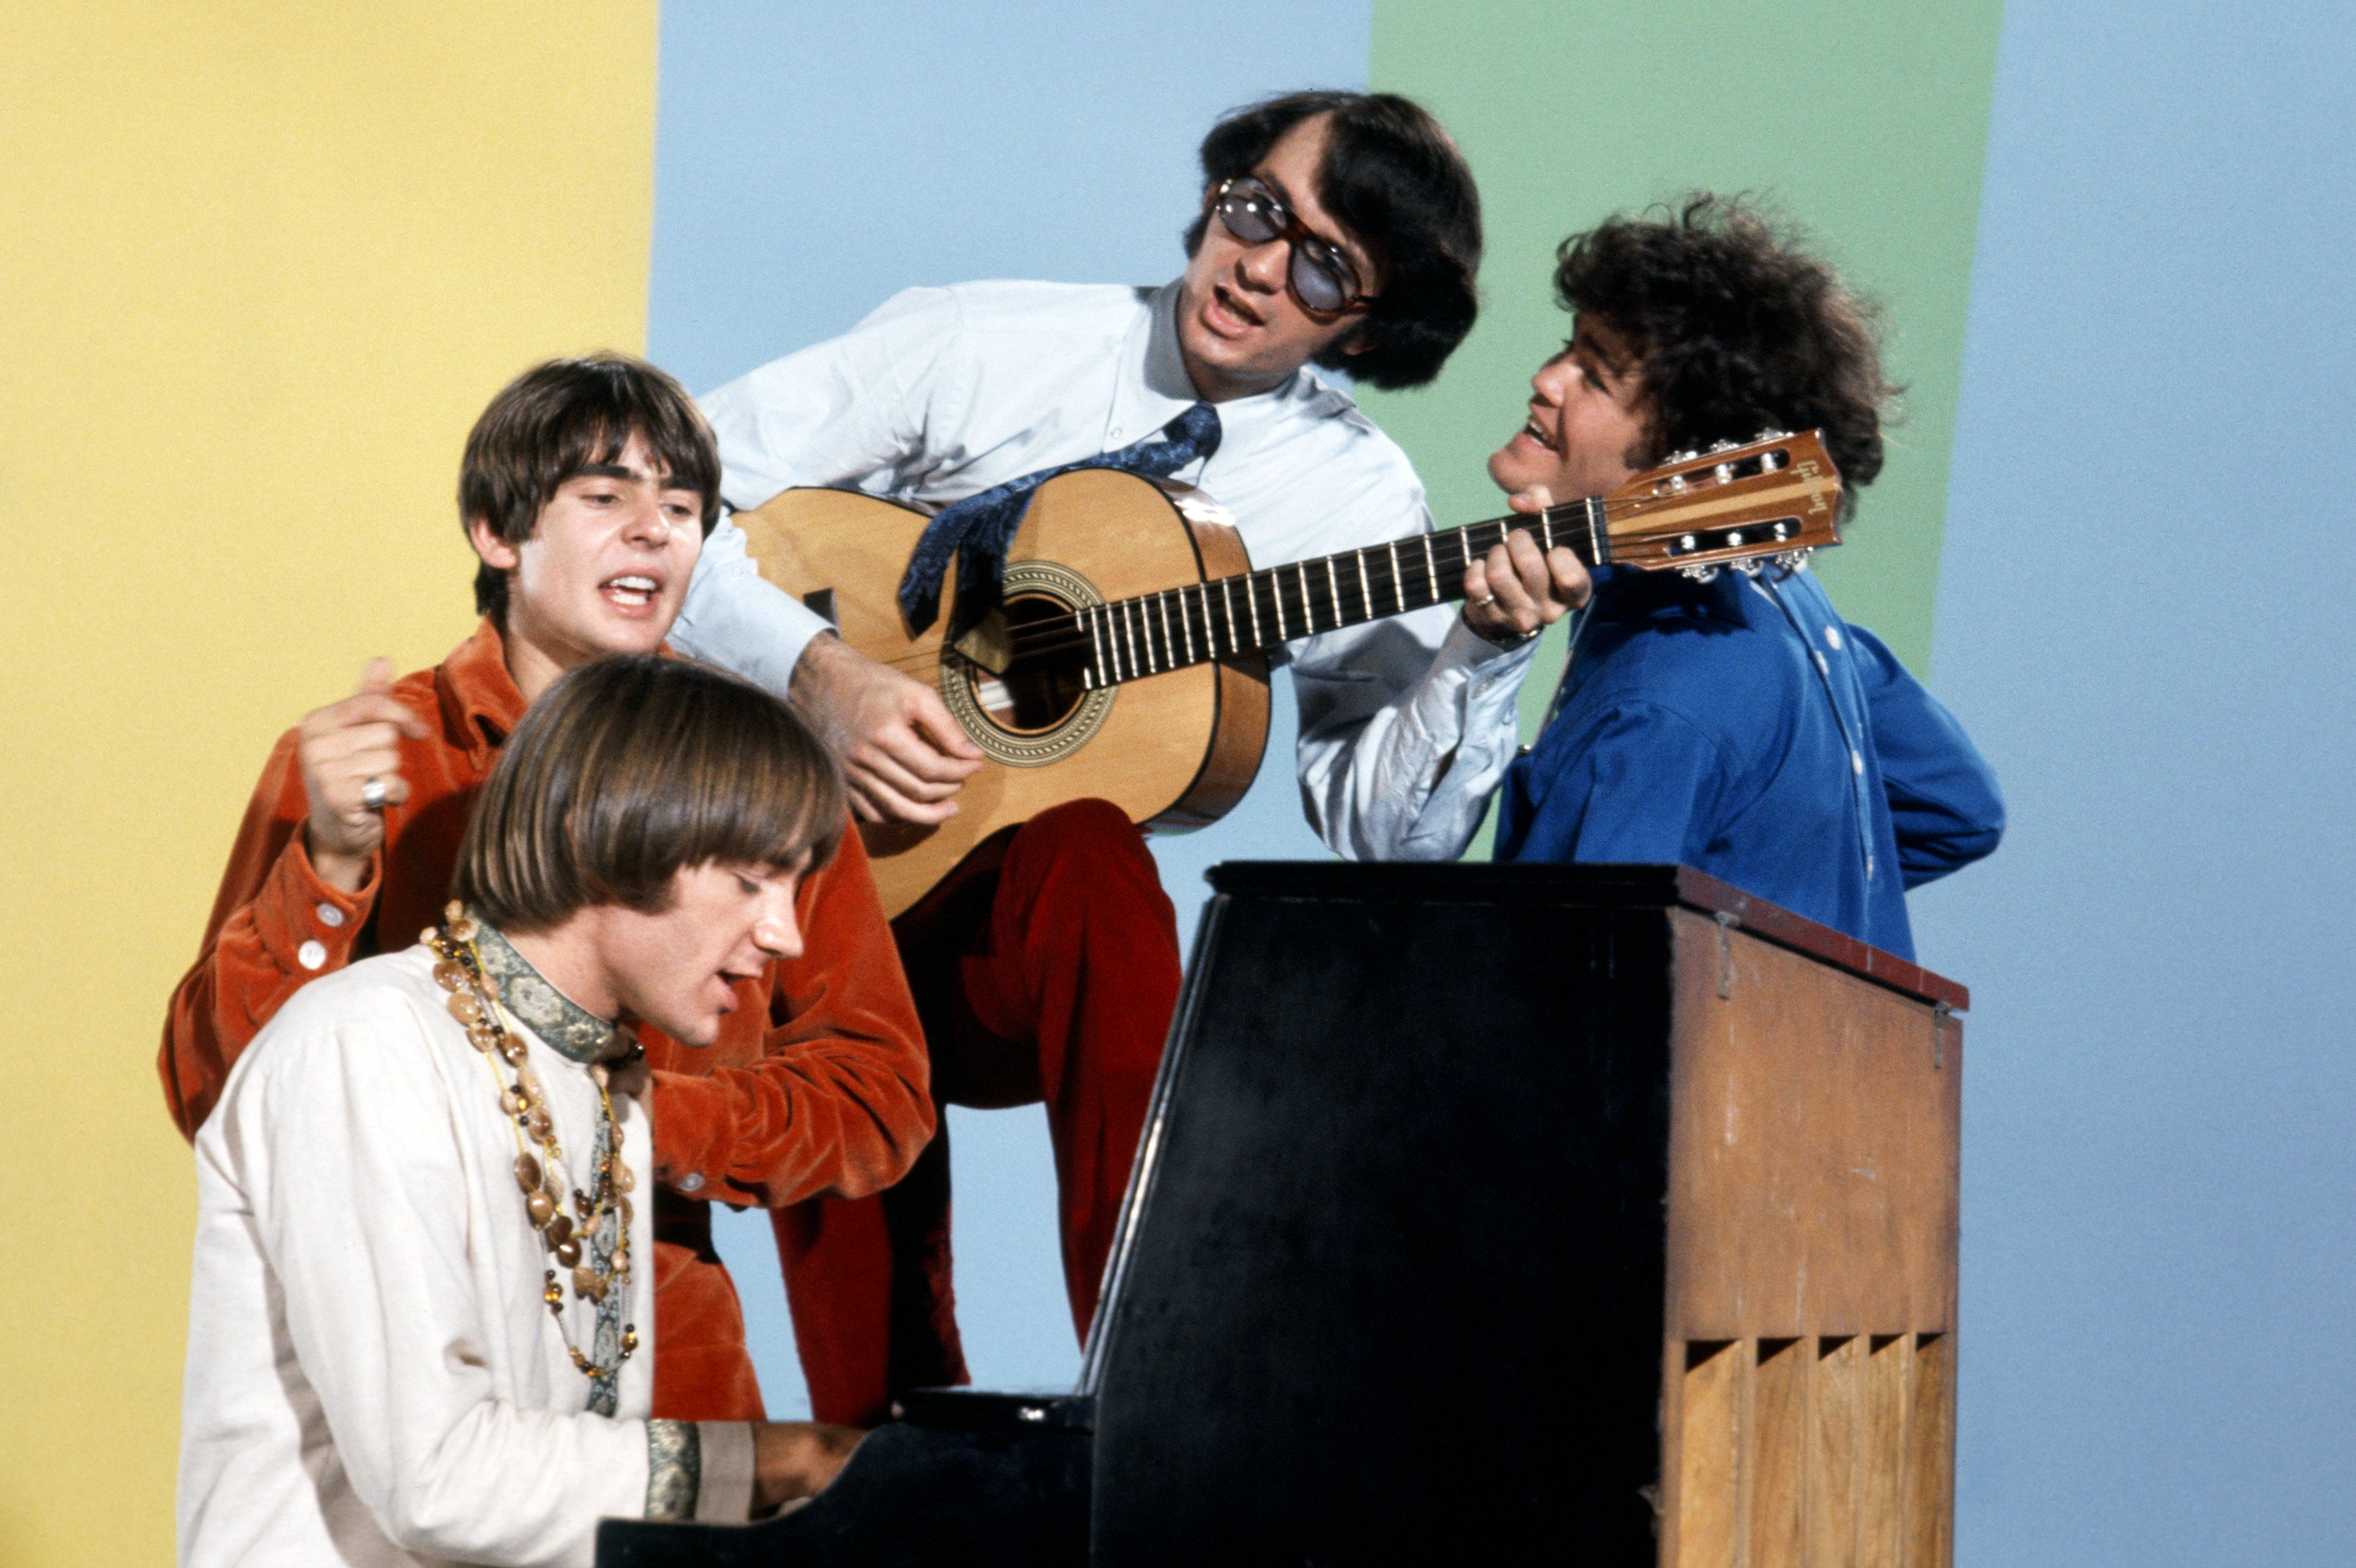 We’re still bananas for The Monkees